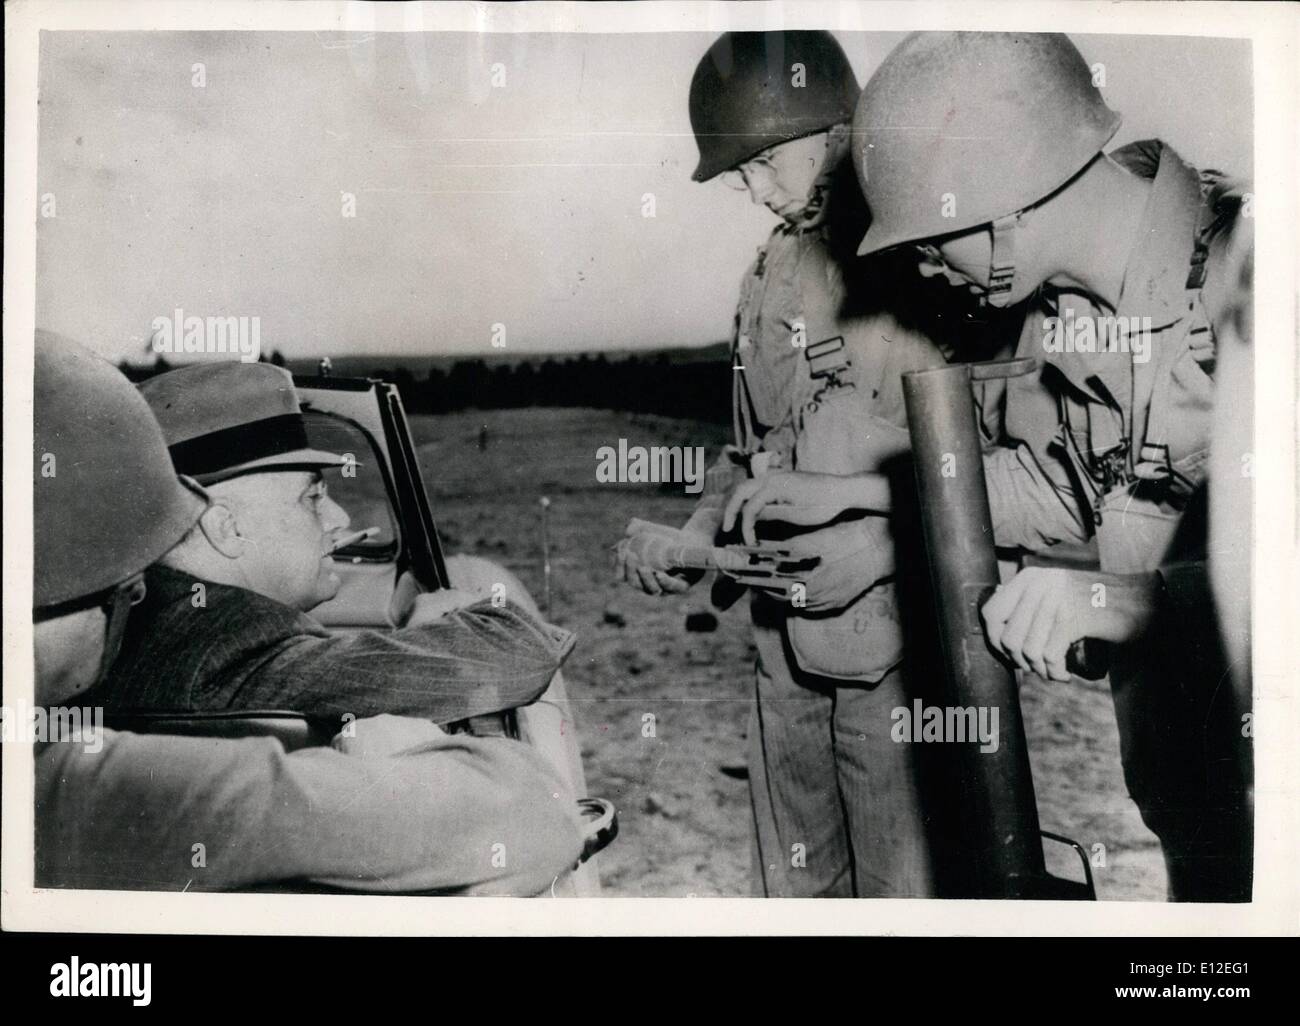 Dec. 16, 2011 - Roosevelt Sees The ''Bazooka'': When Pres. Roosevelt visited Camp Carson in Colorado he witnessed a demonstration of the anti-tank rocket gun nicknamed the ''Bazooka''. He is shown here as Lt. Carl Markell and Capt. George Anthony (L to R) explained its working parts. Stock Photo